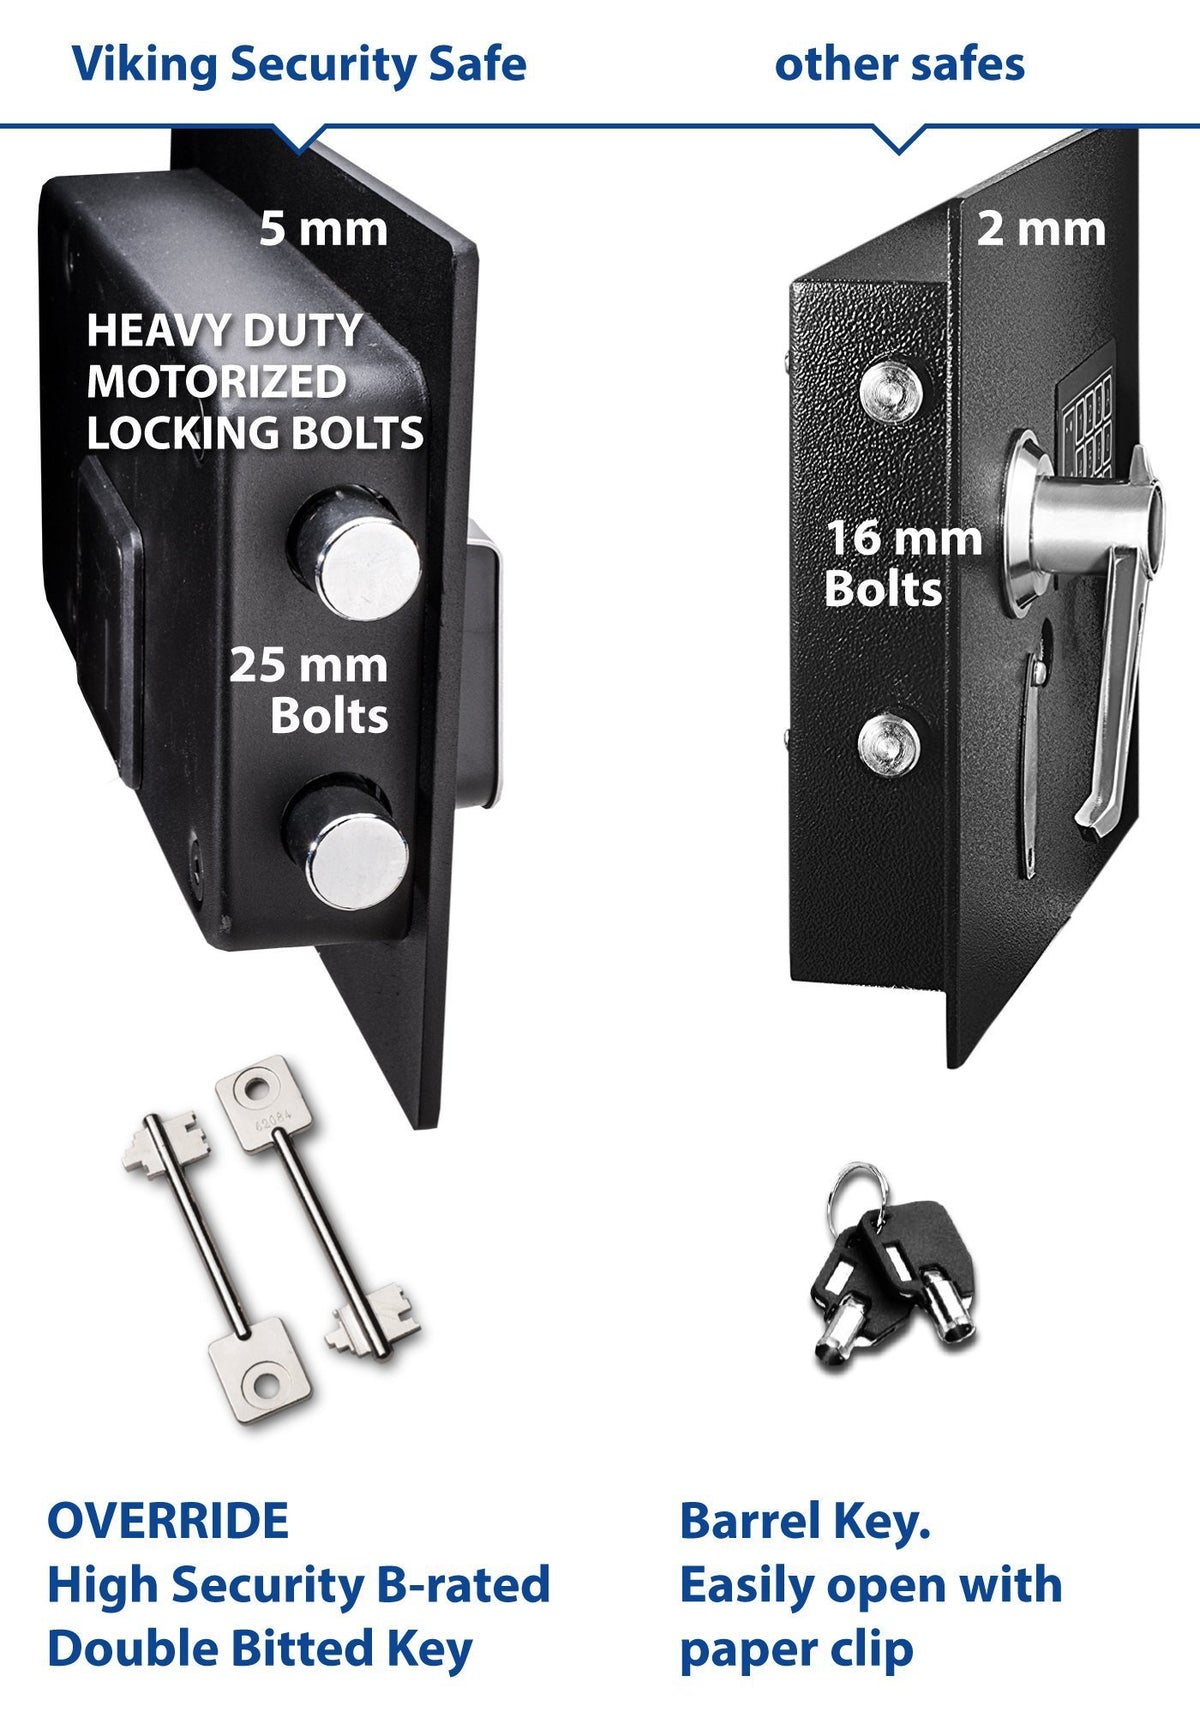 Viking VS-48DS Large Depository Safe with Keypad Lock Comparison to other safe doors